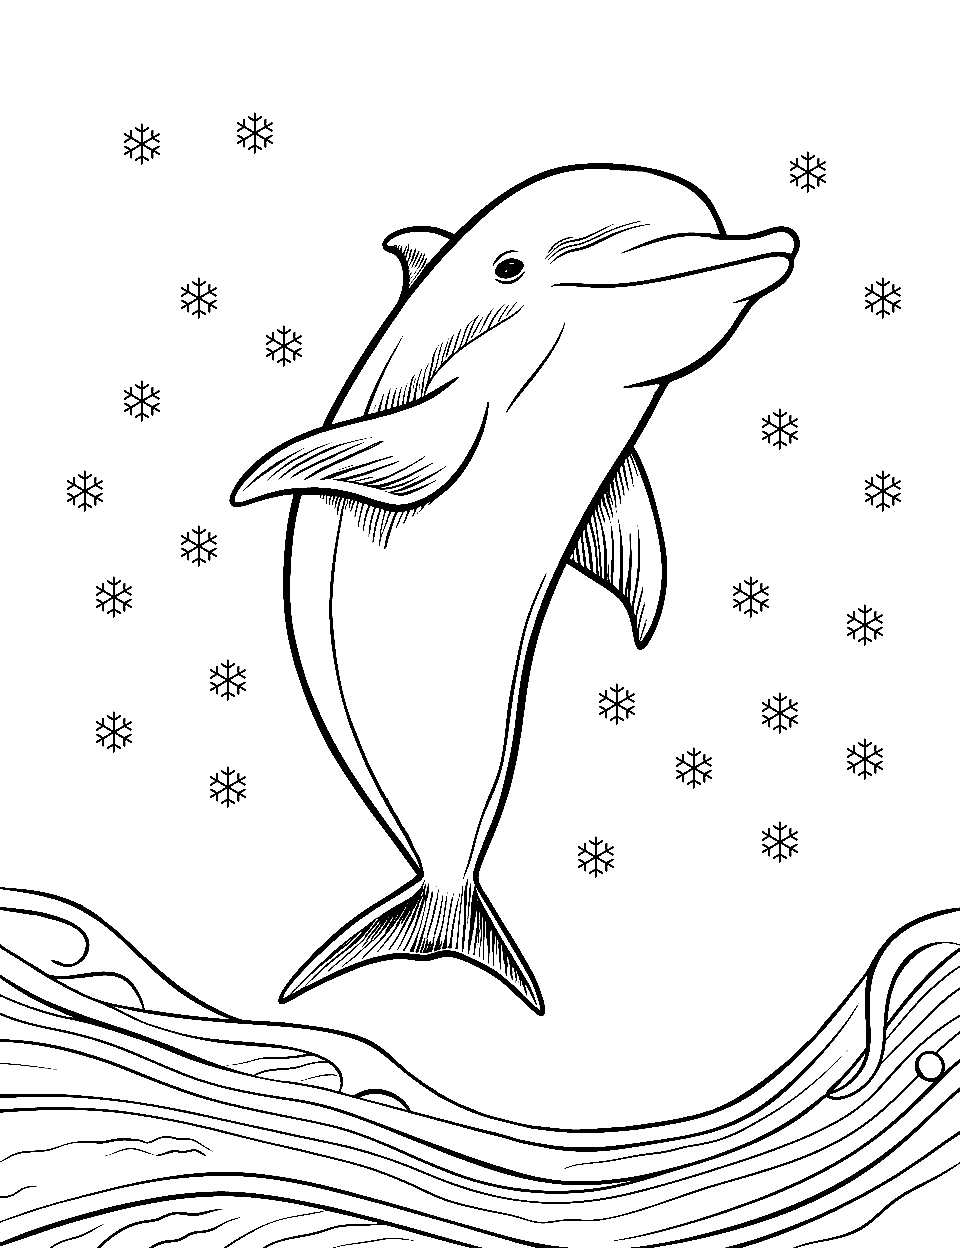 Winter Dolphin Adventure Coloring Page - A dolphin gracefully leaping above icy, glistening ocean waves with snow gently falling.